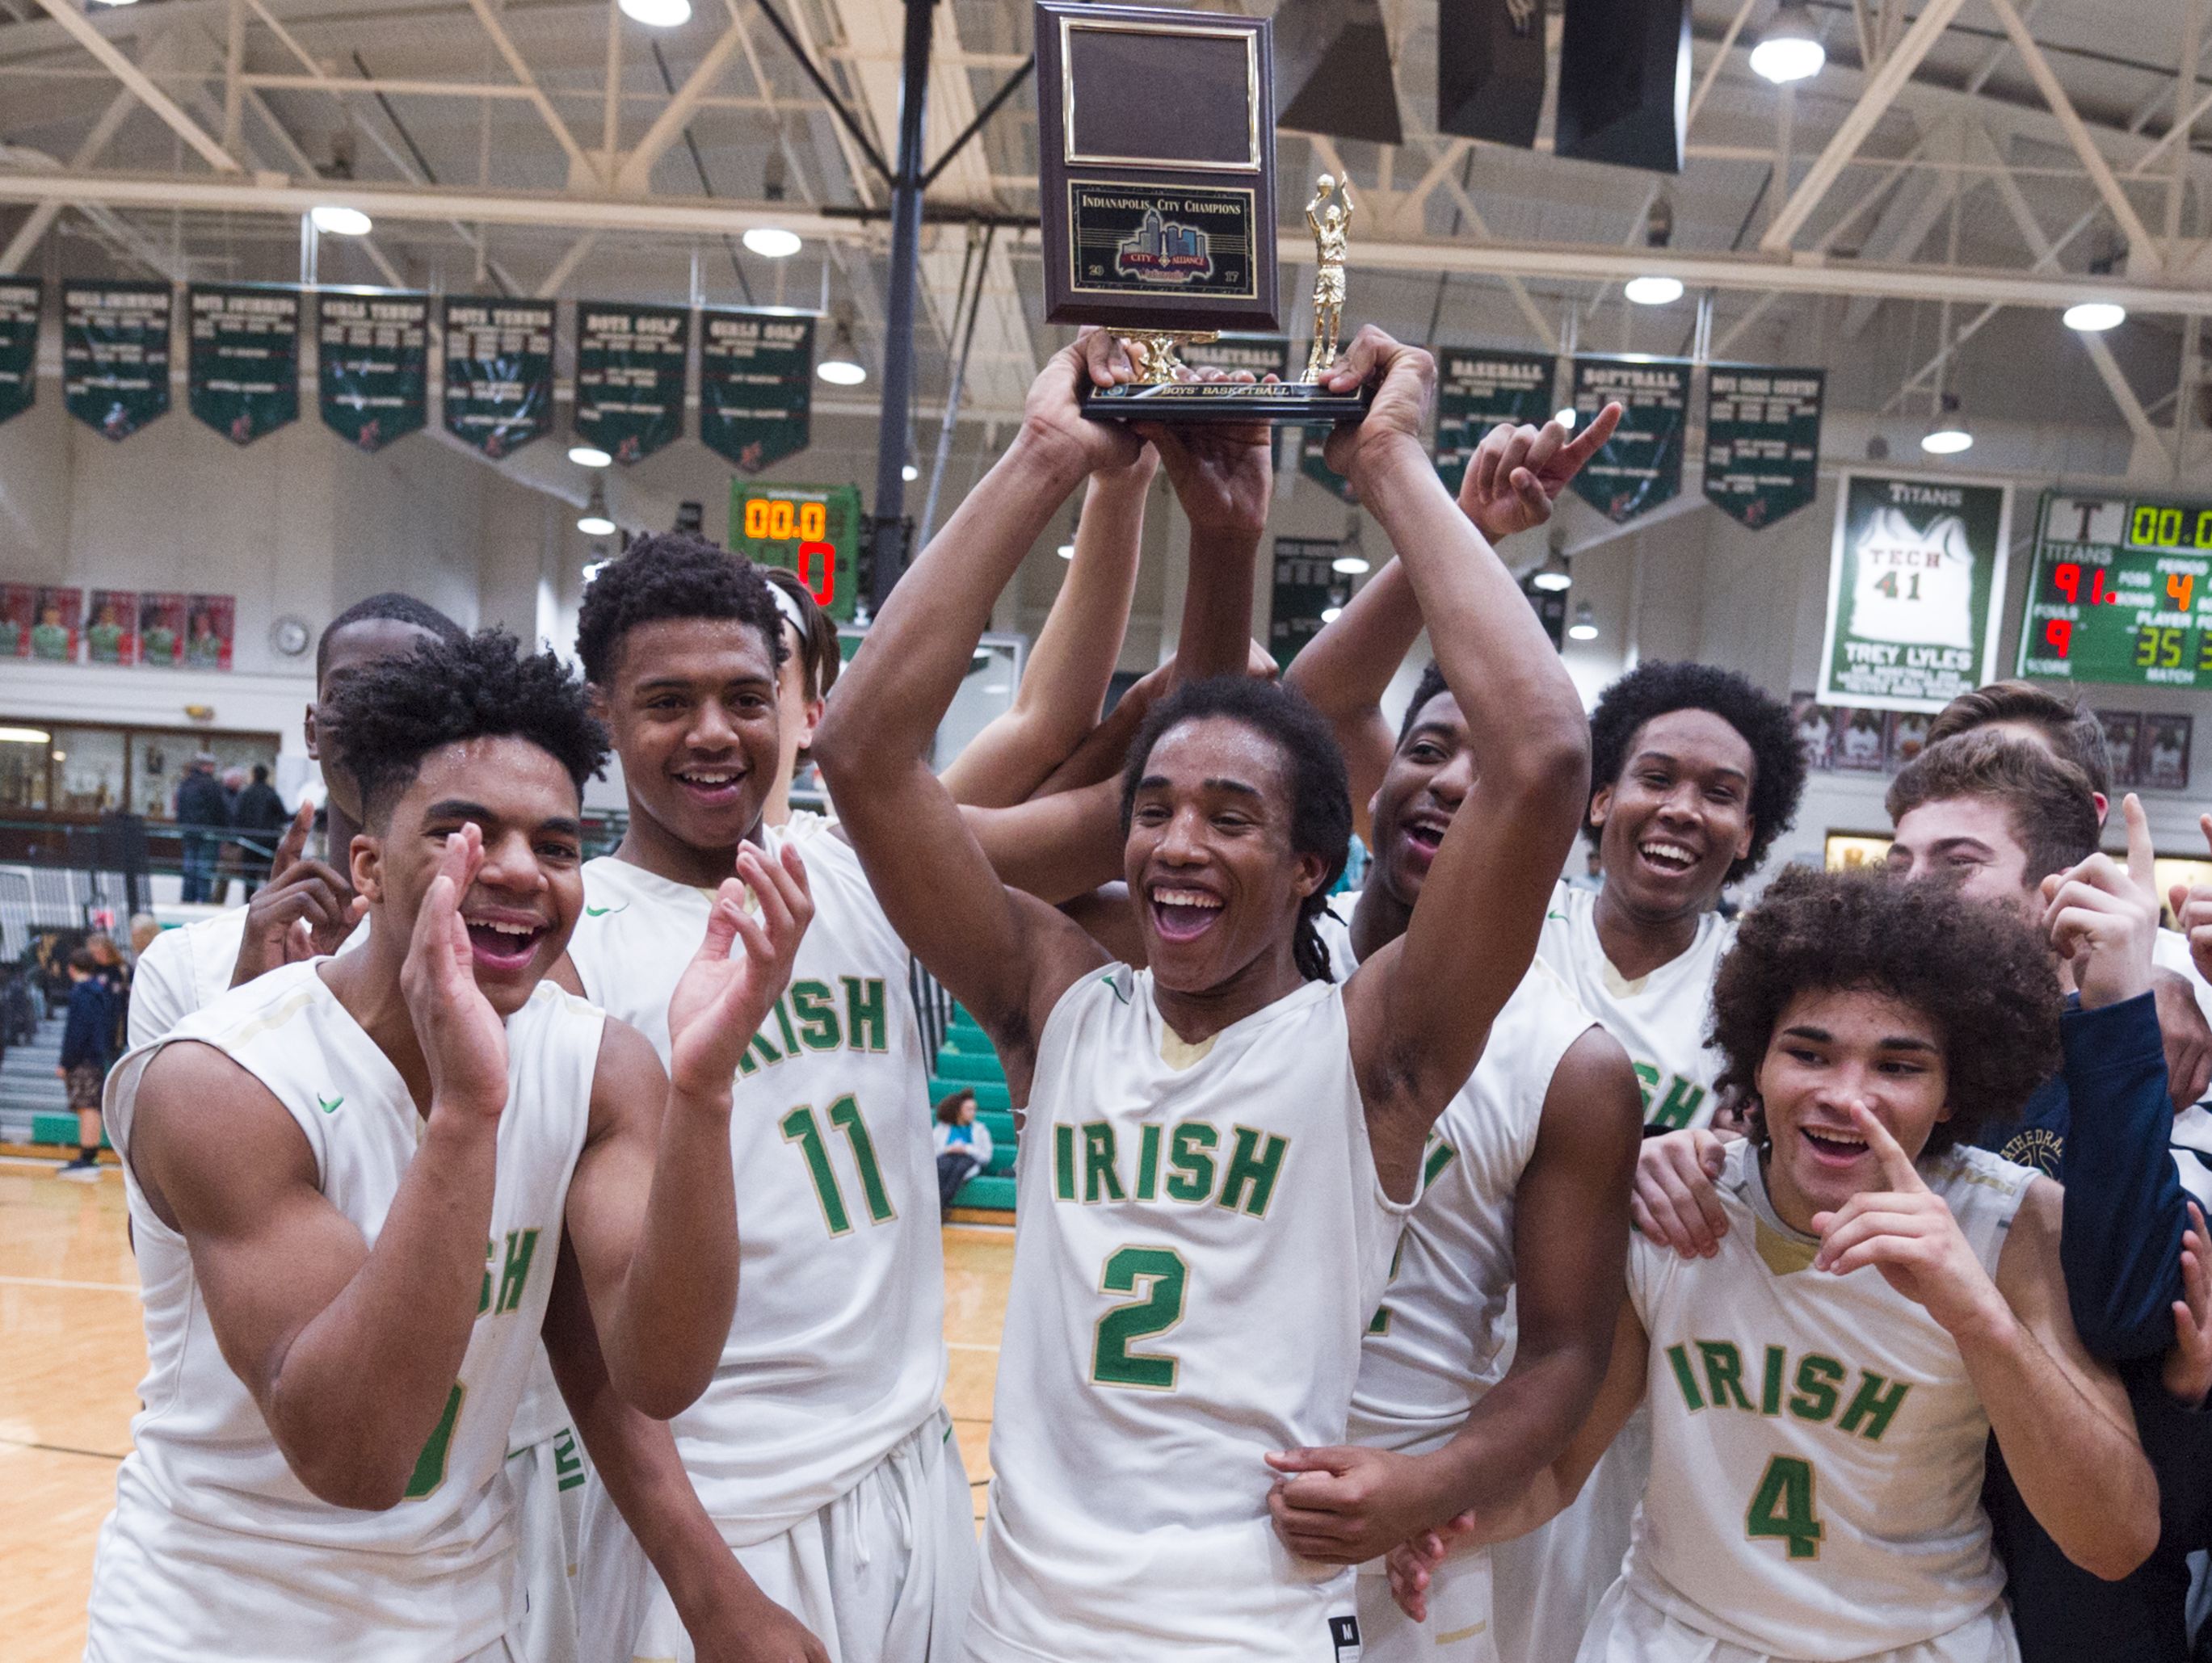 The Cathedral High School team celebrate their victory in the Indianapolis City Boy's Basketball Tournament championship game Monday, Jan. 23, 2017, at Arsenal Tech High School. Cathedral won 91-67.